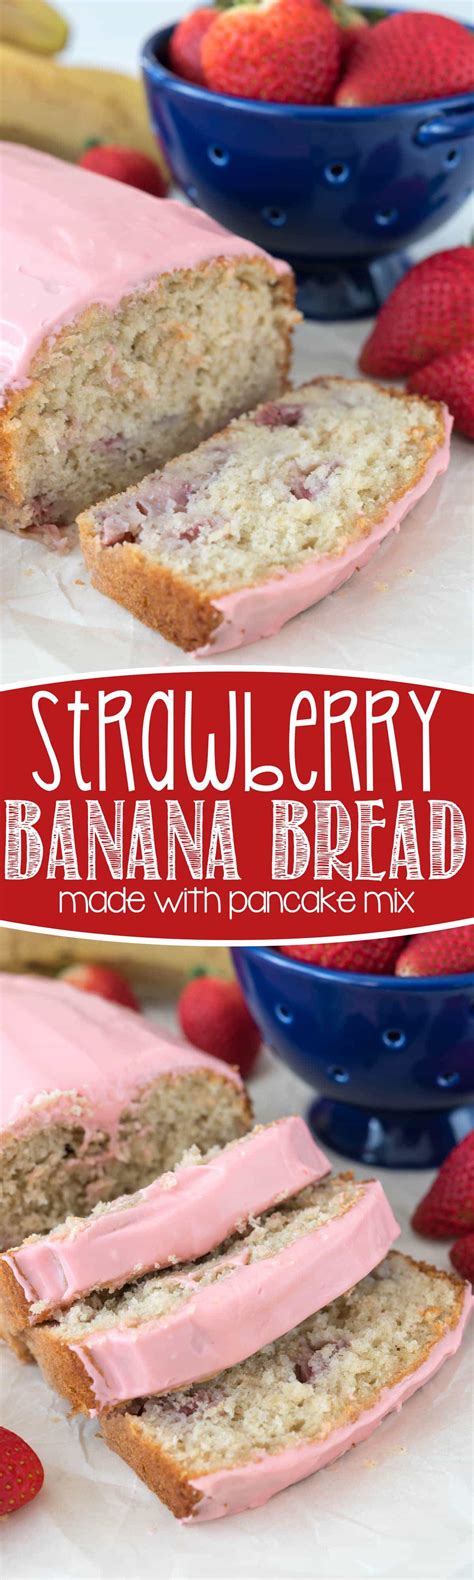 Lightly grease pan or muffin pan. Strawberry Banana Bread - Crazy for Crust